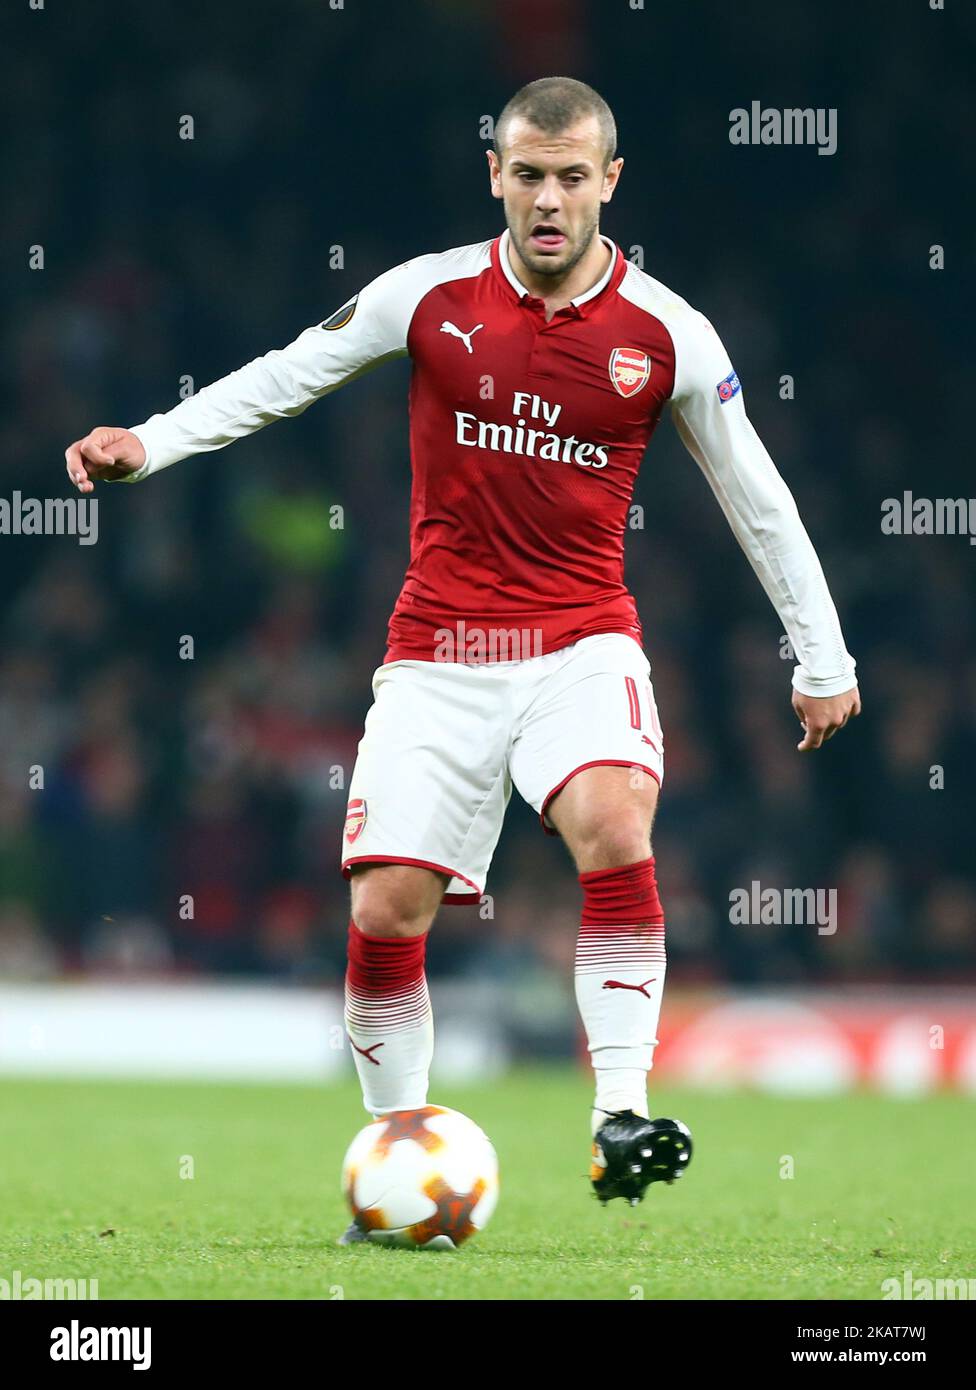 Arsenal's Jack Wilshere during UEFA Europa League Group H match between Arsenal and Red Star Belgrade (Crvena Zvezda) at The Emirates, in London, UK on November 2, 2017. (Photo by Kieran Galvin/NurPhoto)  Stock Photo